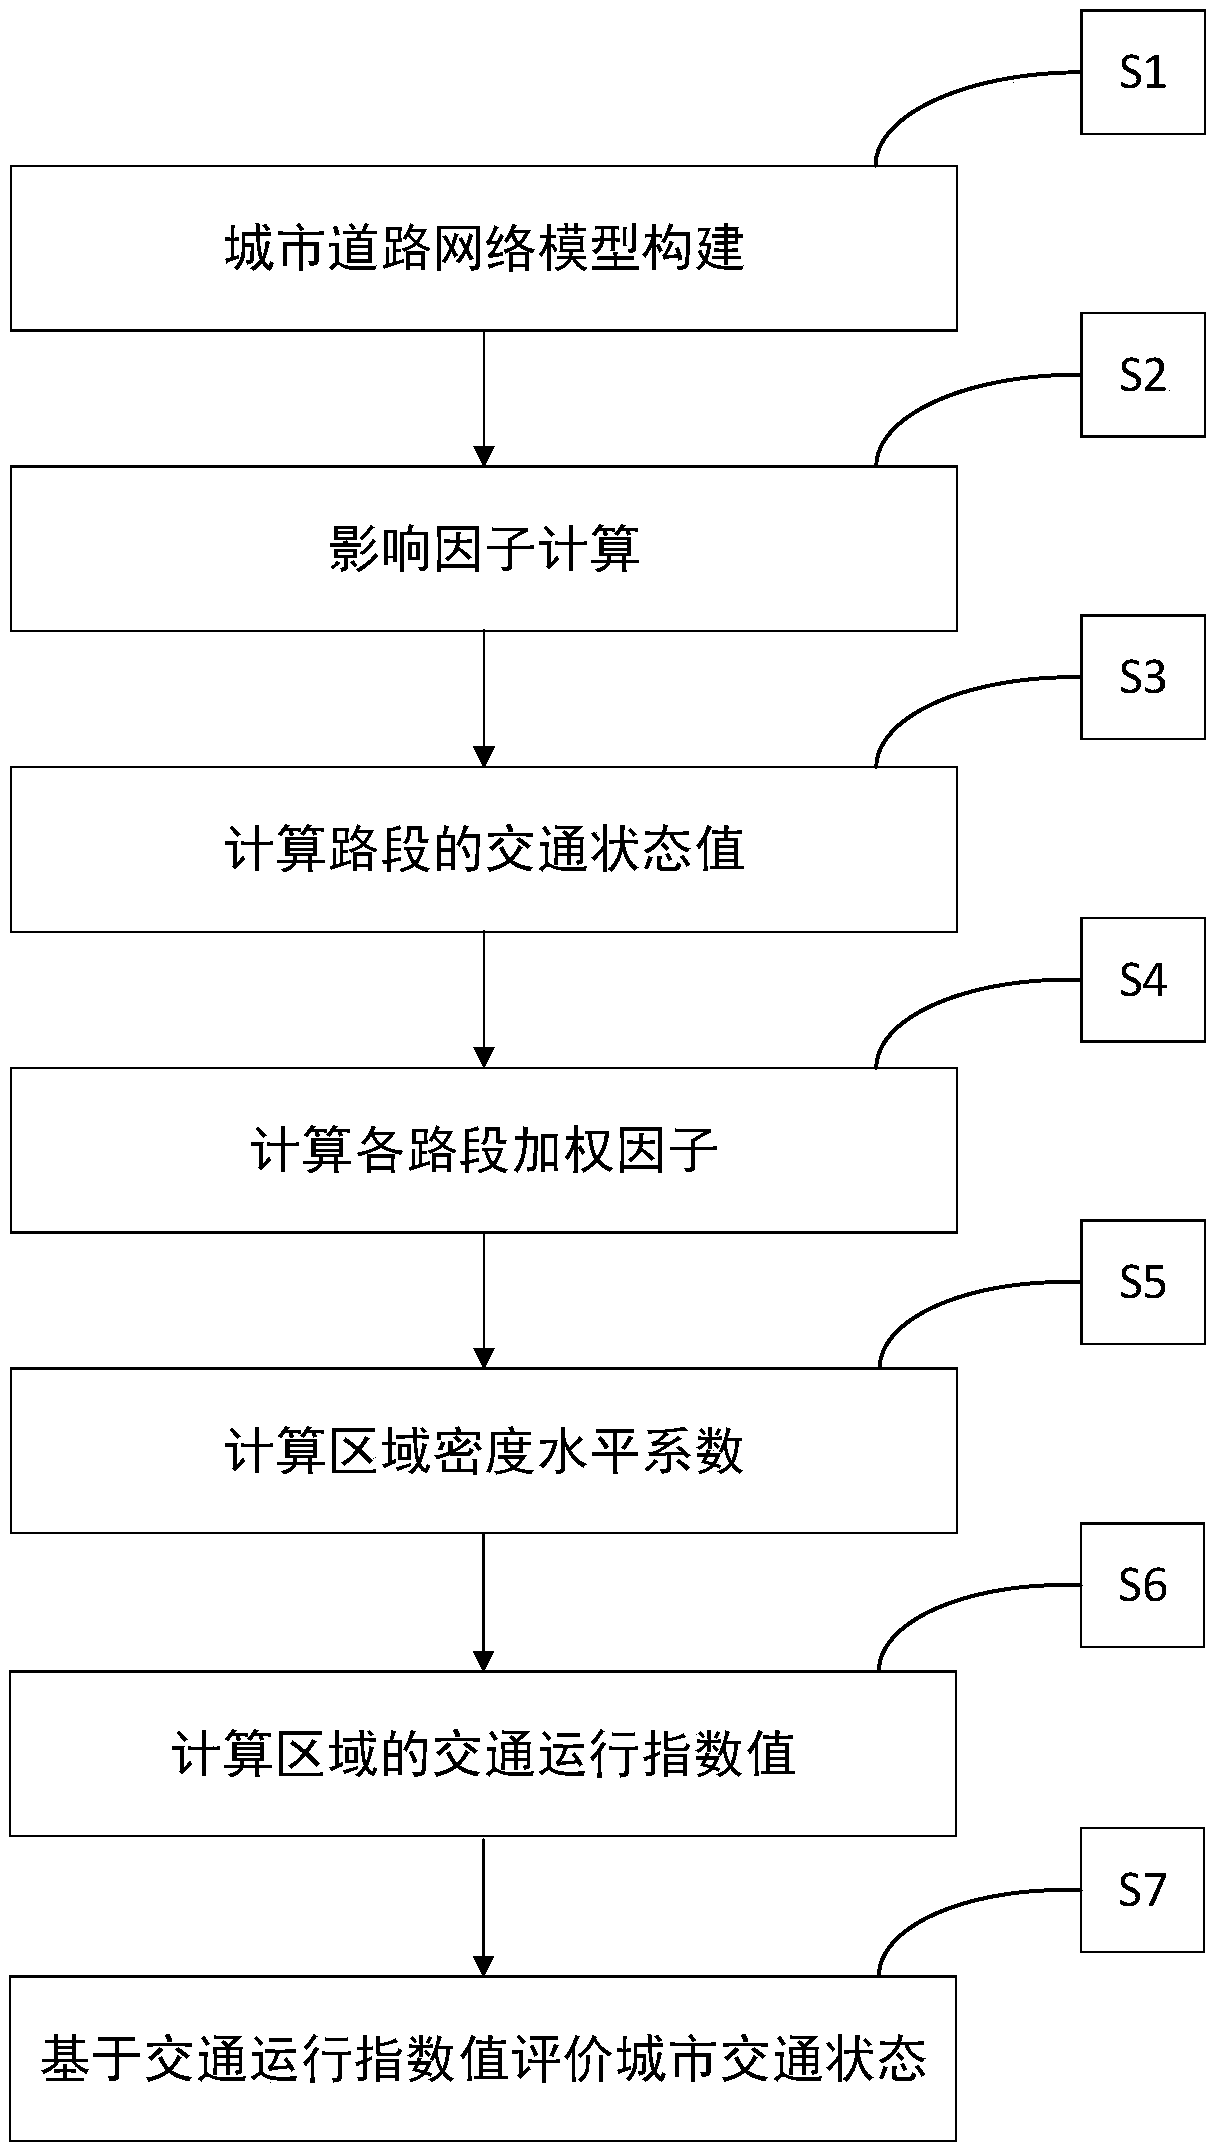 Traffic circulation index building method with consideration to characteristics of urban road traffic network